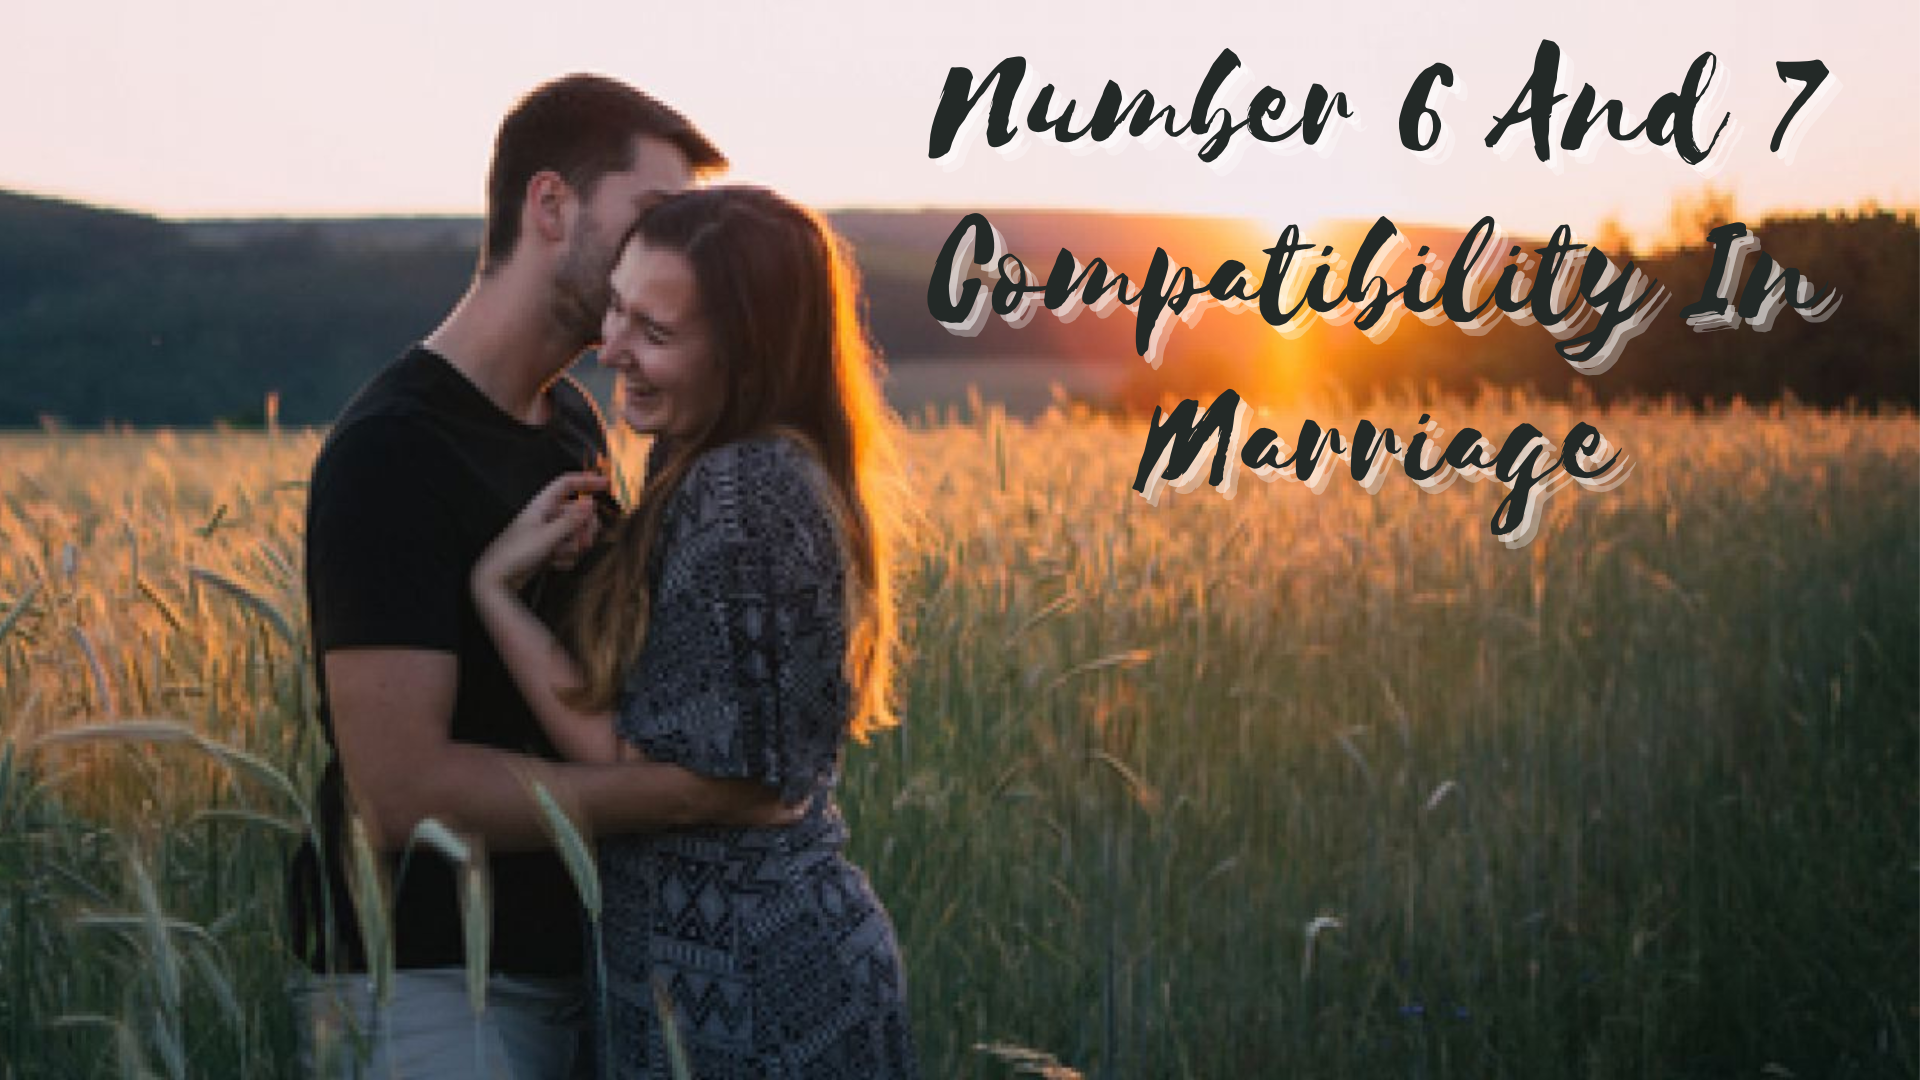 Happy couple cuddling each other while in the field with words Number 6 And 7 Compatibility In Marriage